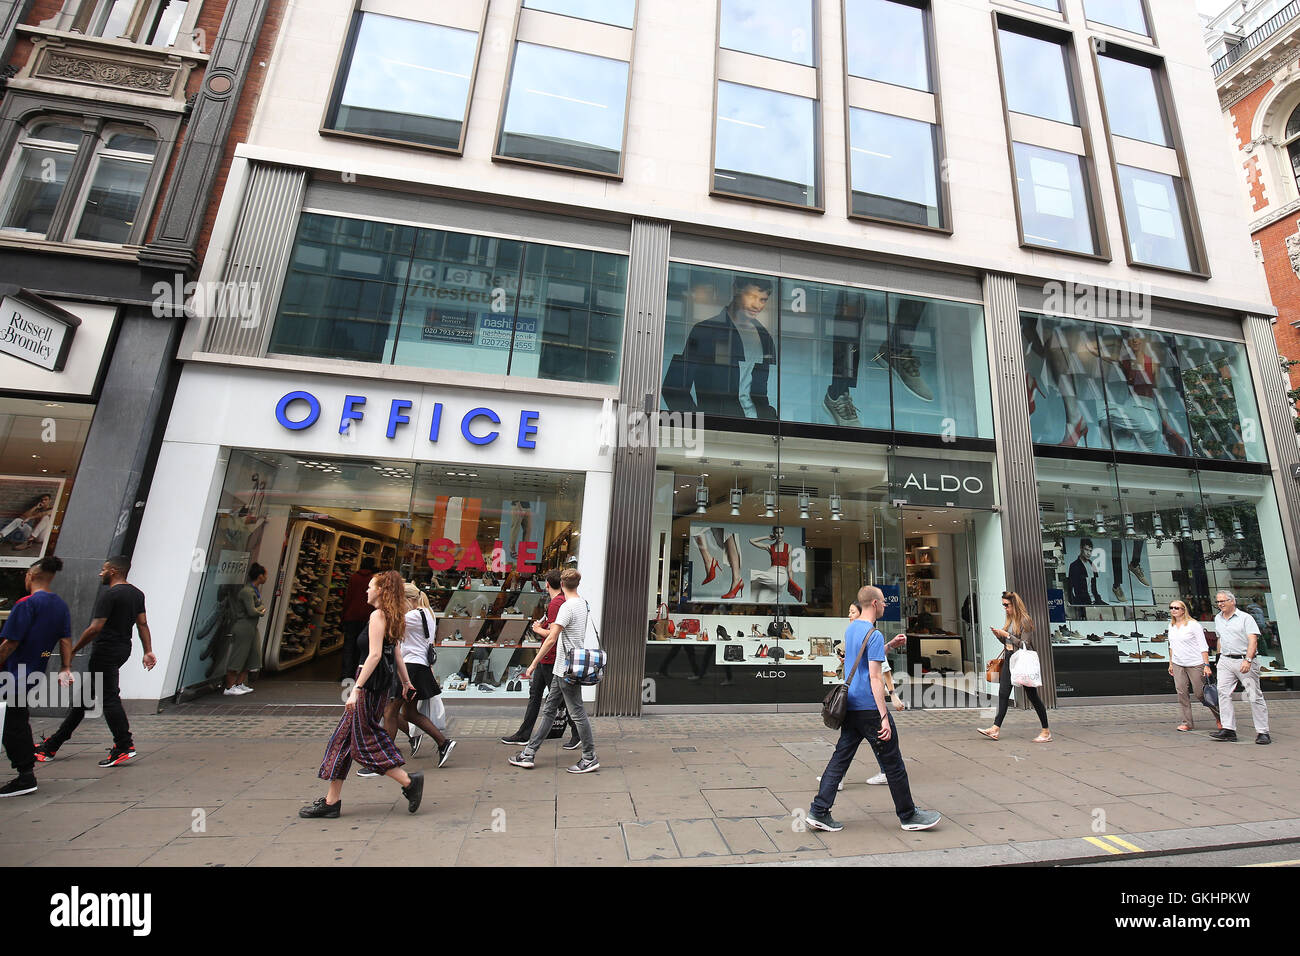 UK, London : Office and Aldo are pictured on Oxford Street in Central ...